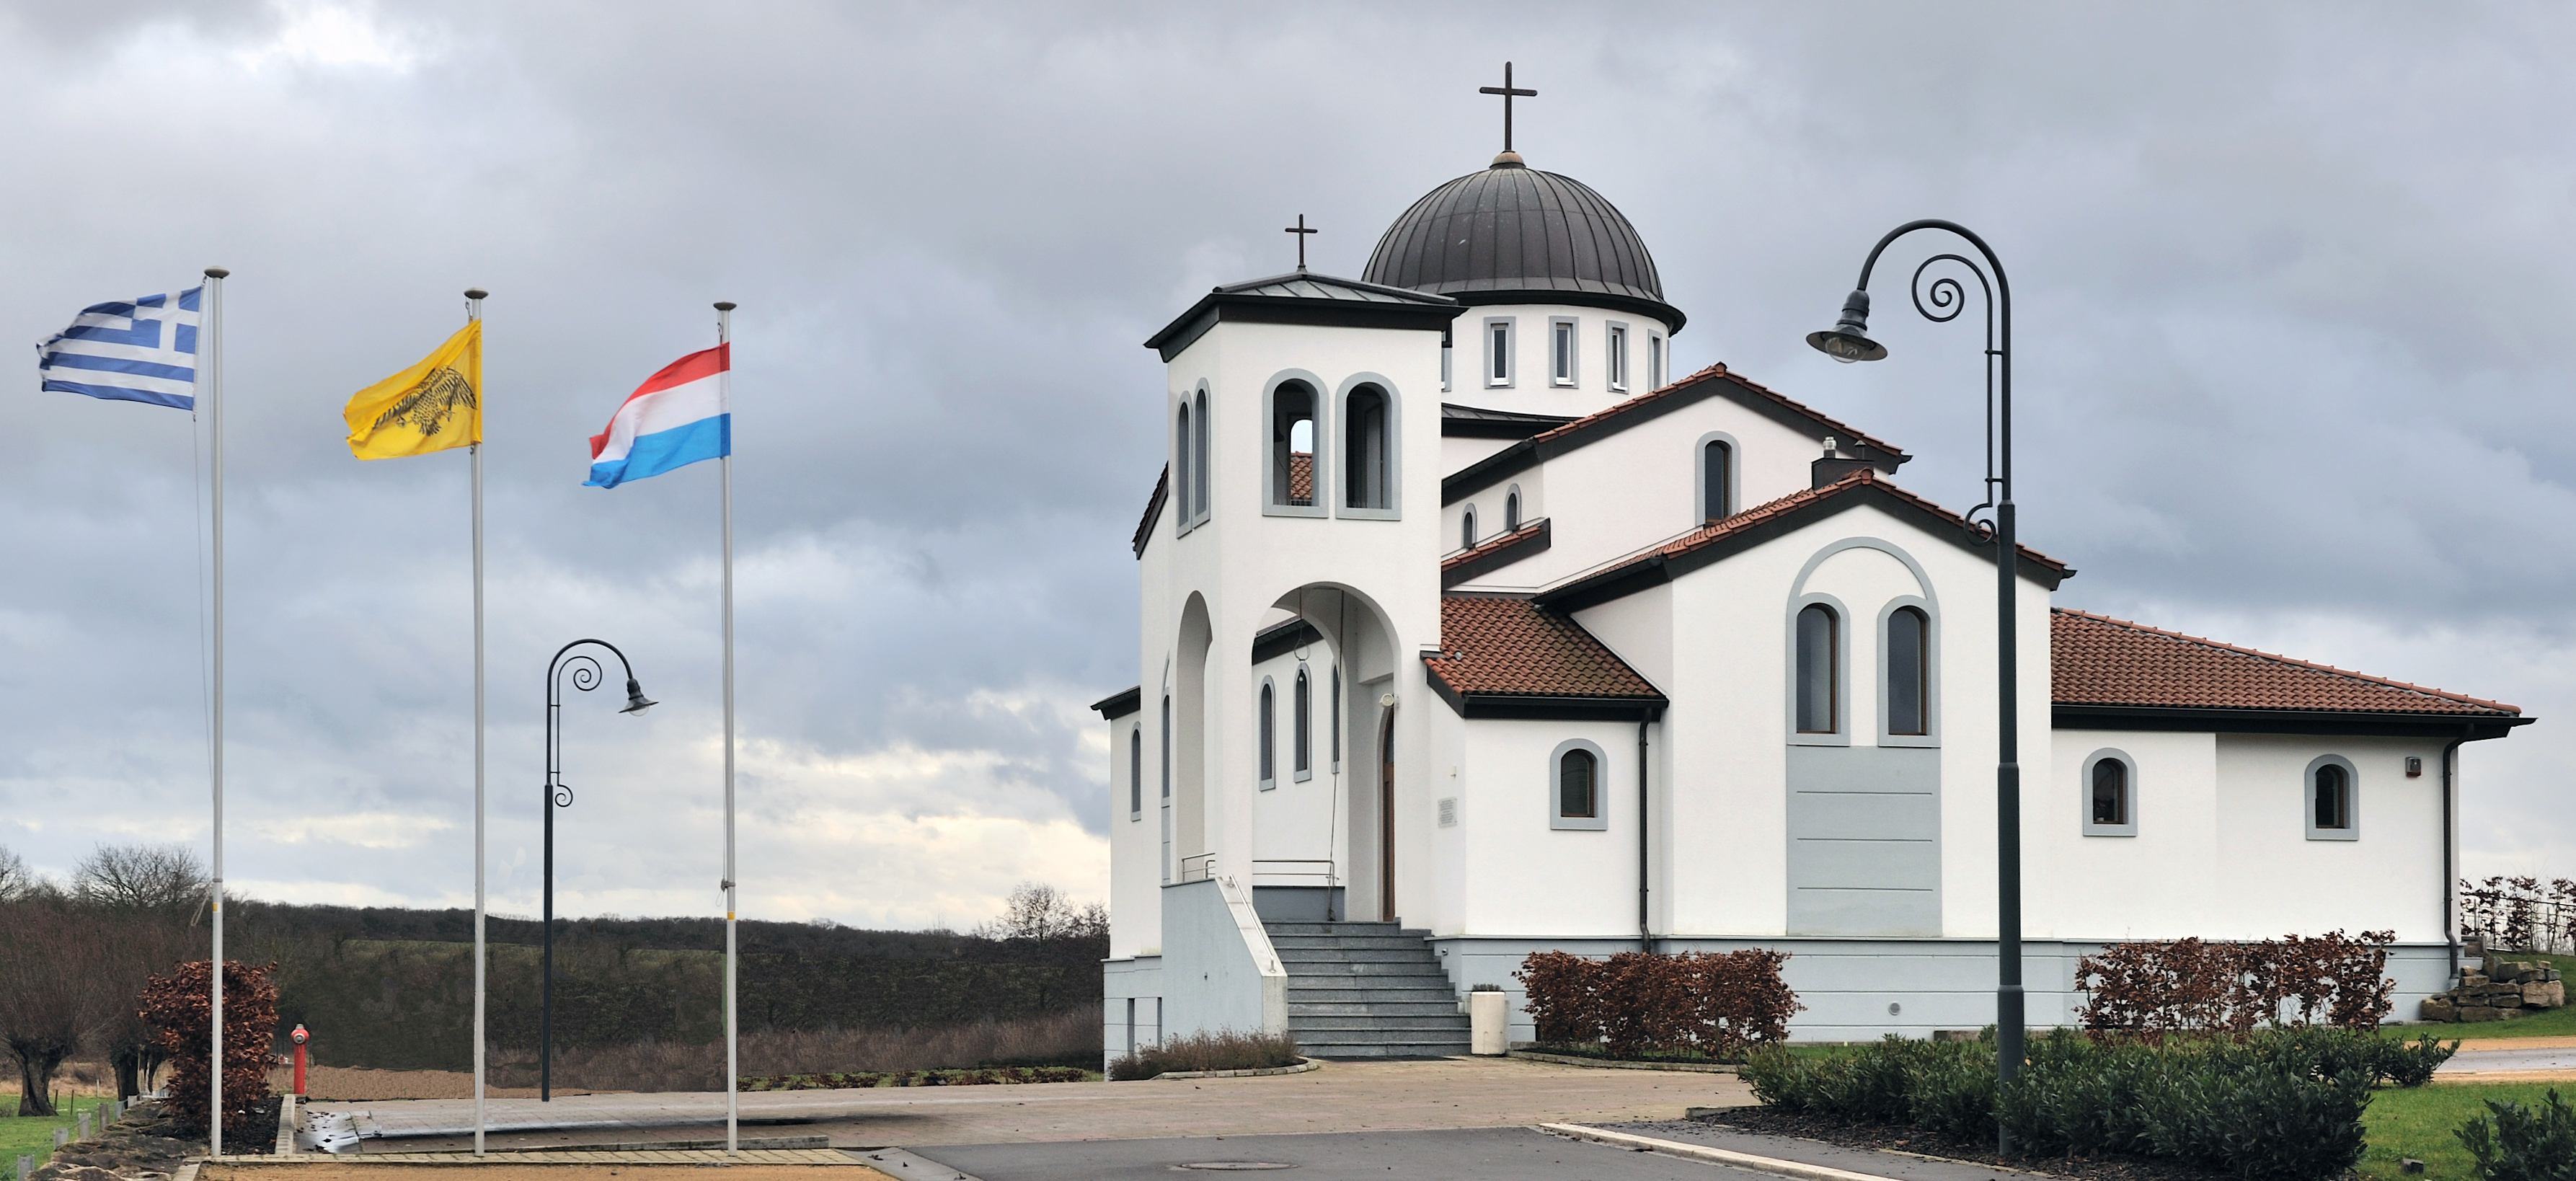 Luxemb Weiler-la-Tour, Greek Orthodox Church with flags